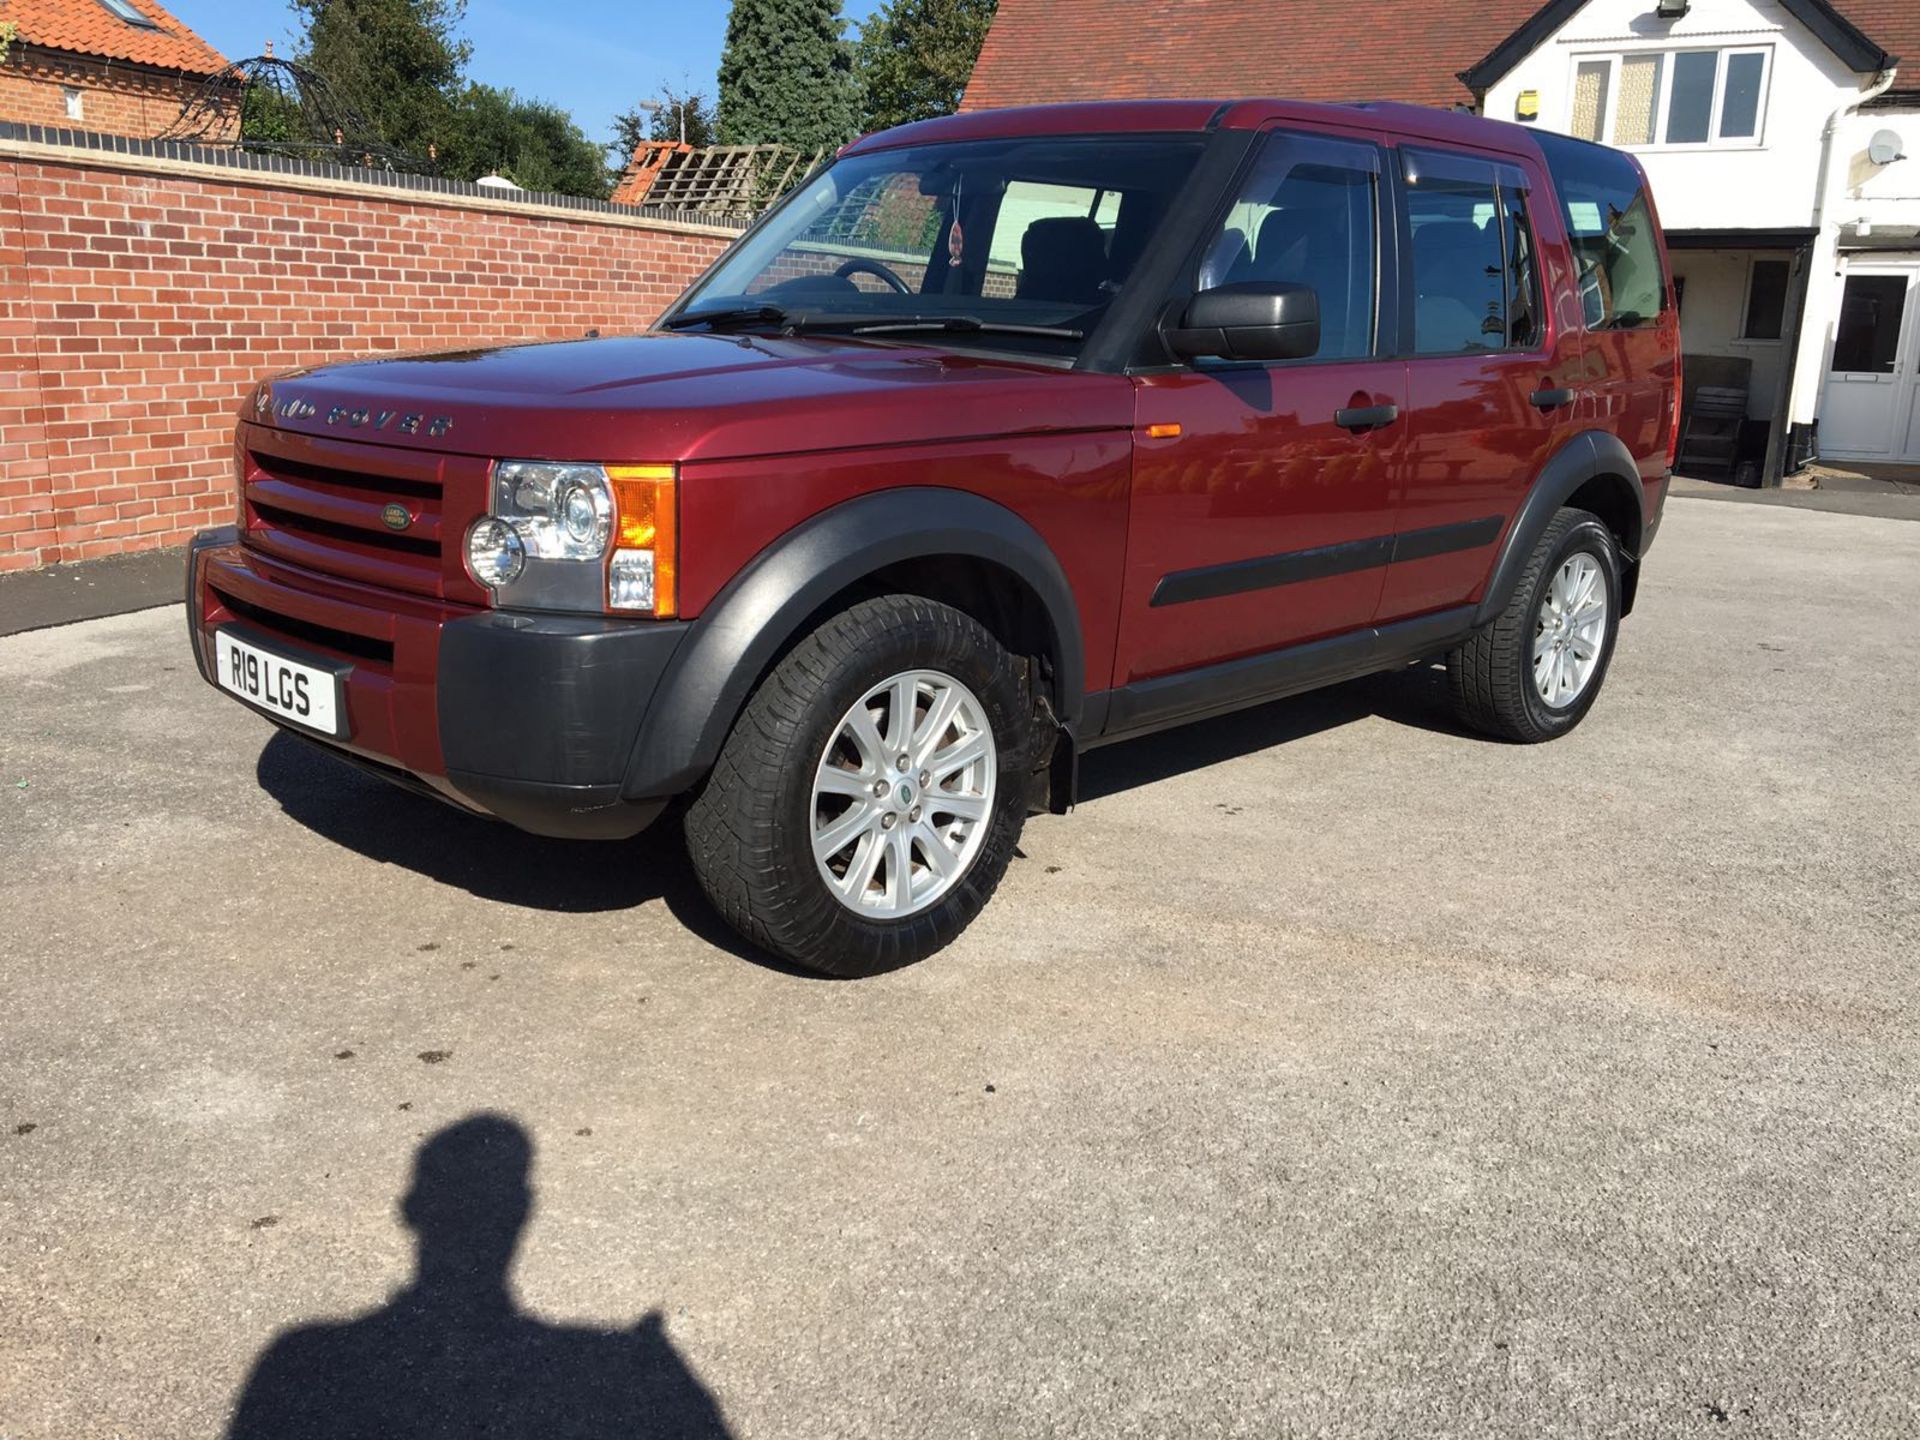 2005/54 REG LAND ROVER DISCOVERY 3 TDV6 S 7 SEATER - 1 FORMER KEEPER *NO VAT* - Image 3 of 12